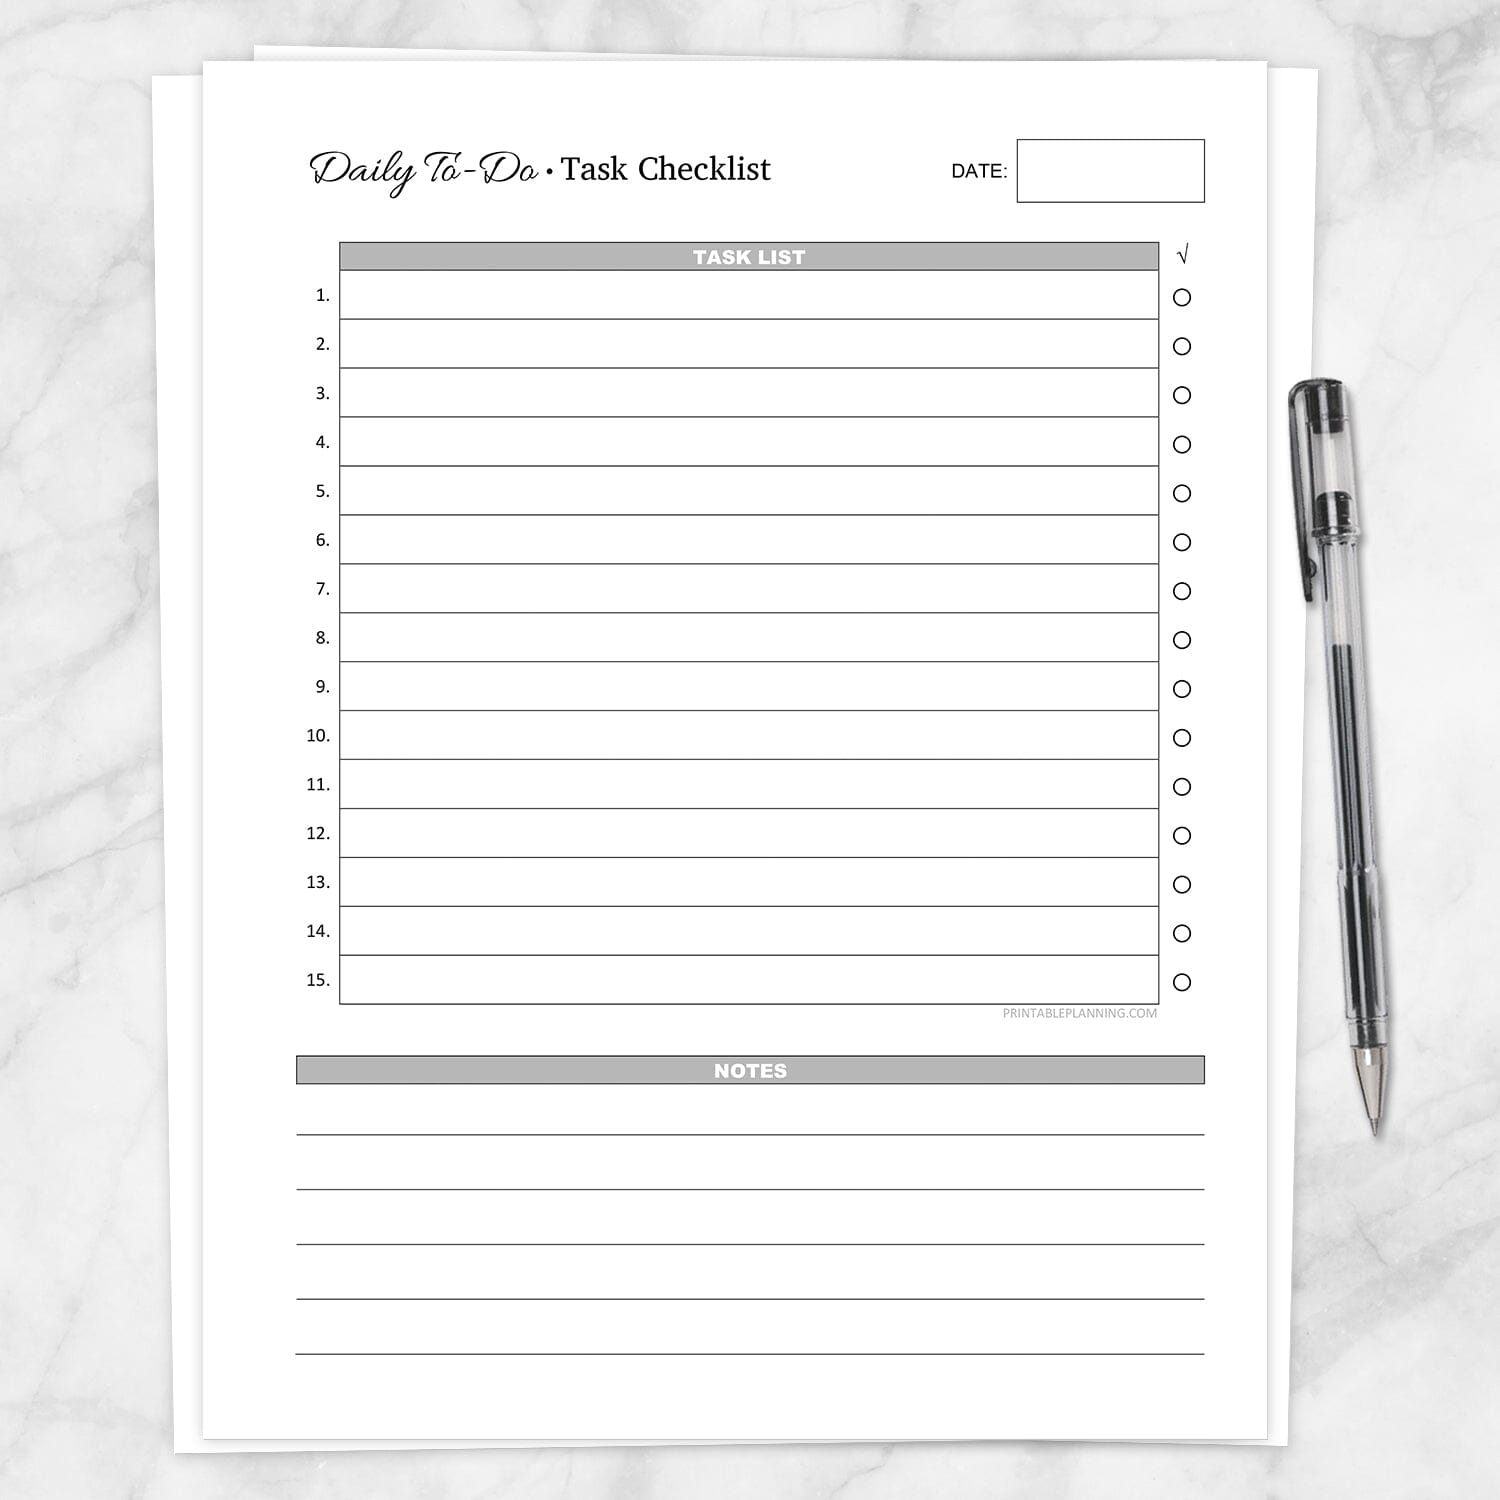 Printable Daily To-Do List - Task Checklist in Gray at Printable Planning.